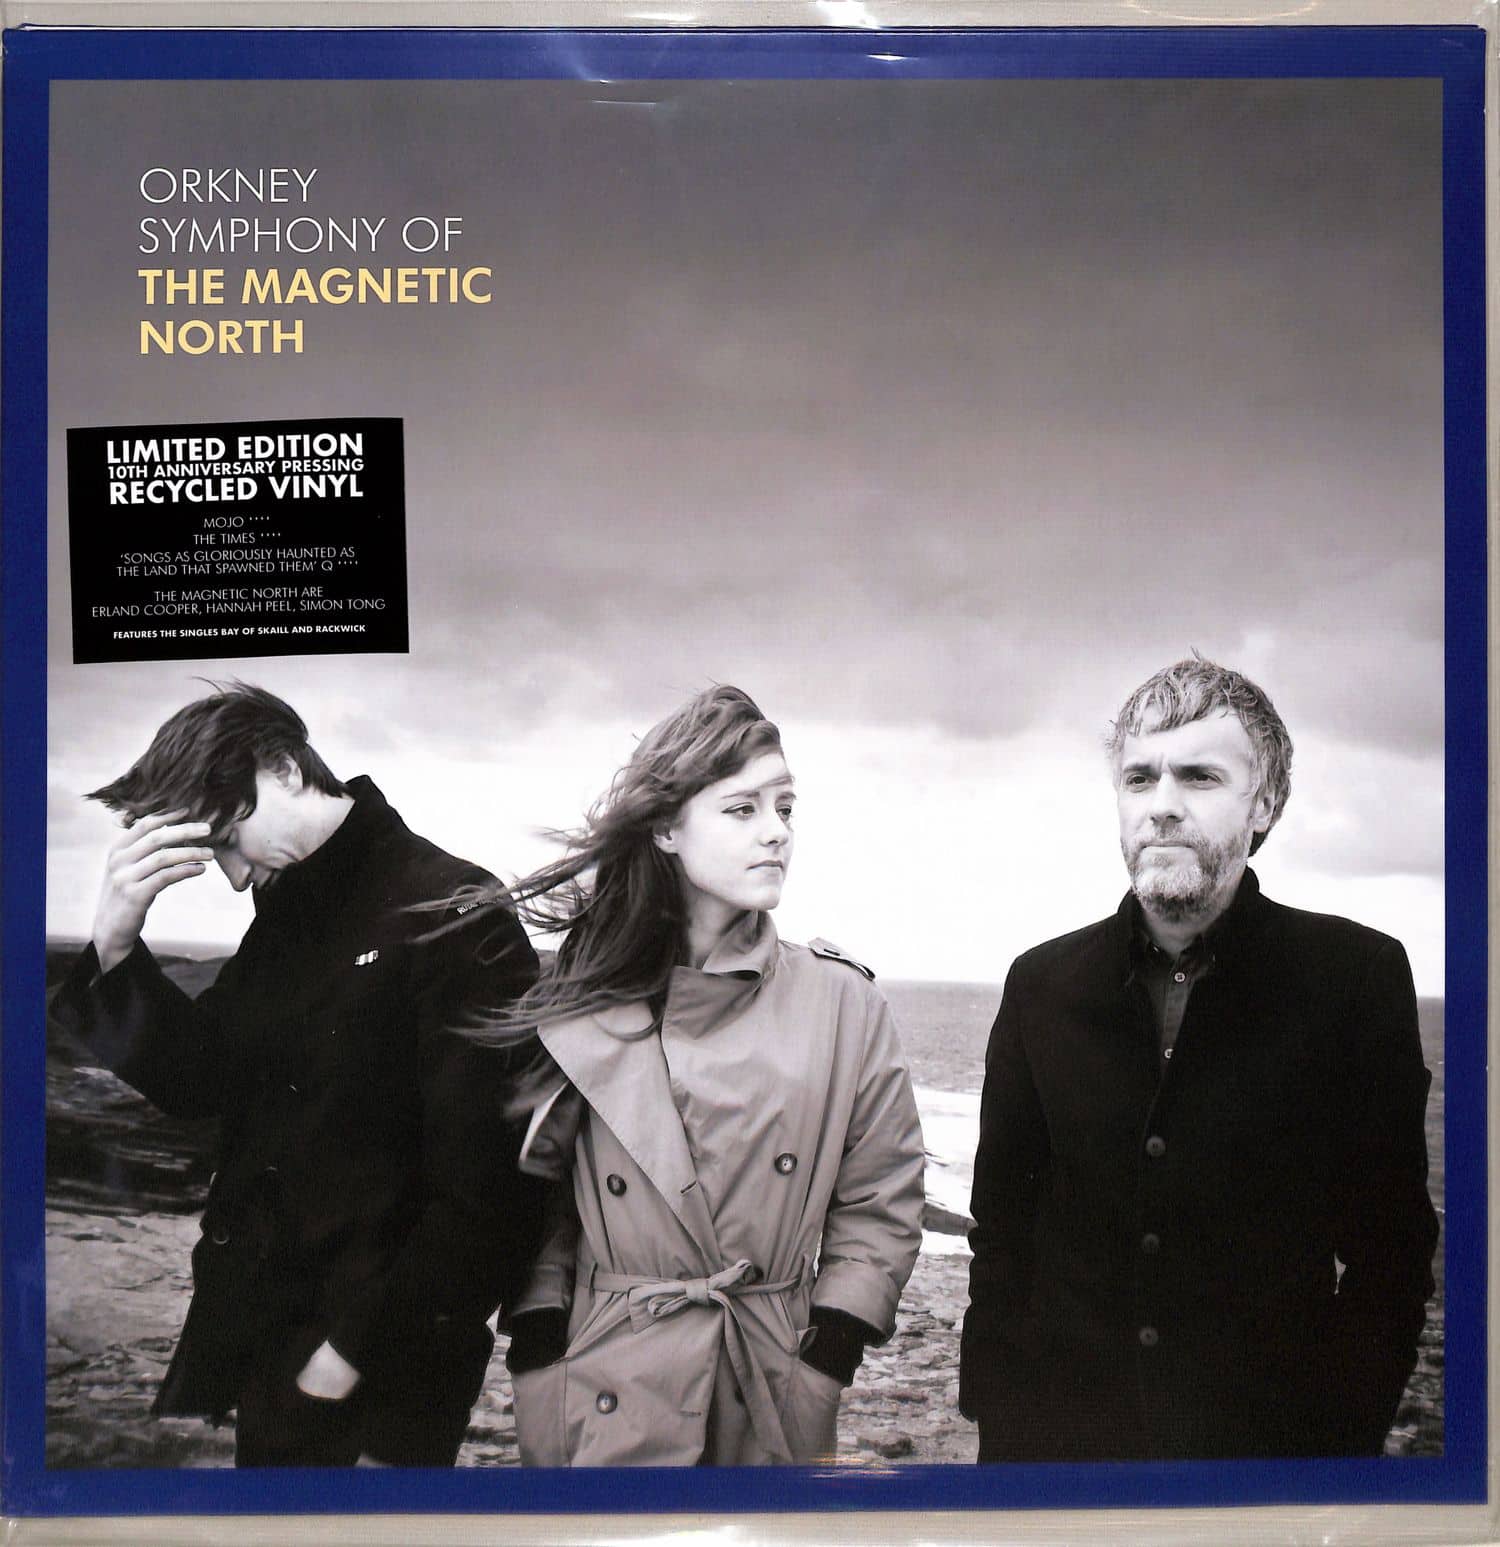 The Magnetic North - ORKNEY: SYMPHONY OF THE MAGNETIC NORTH 